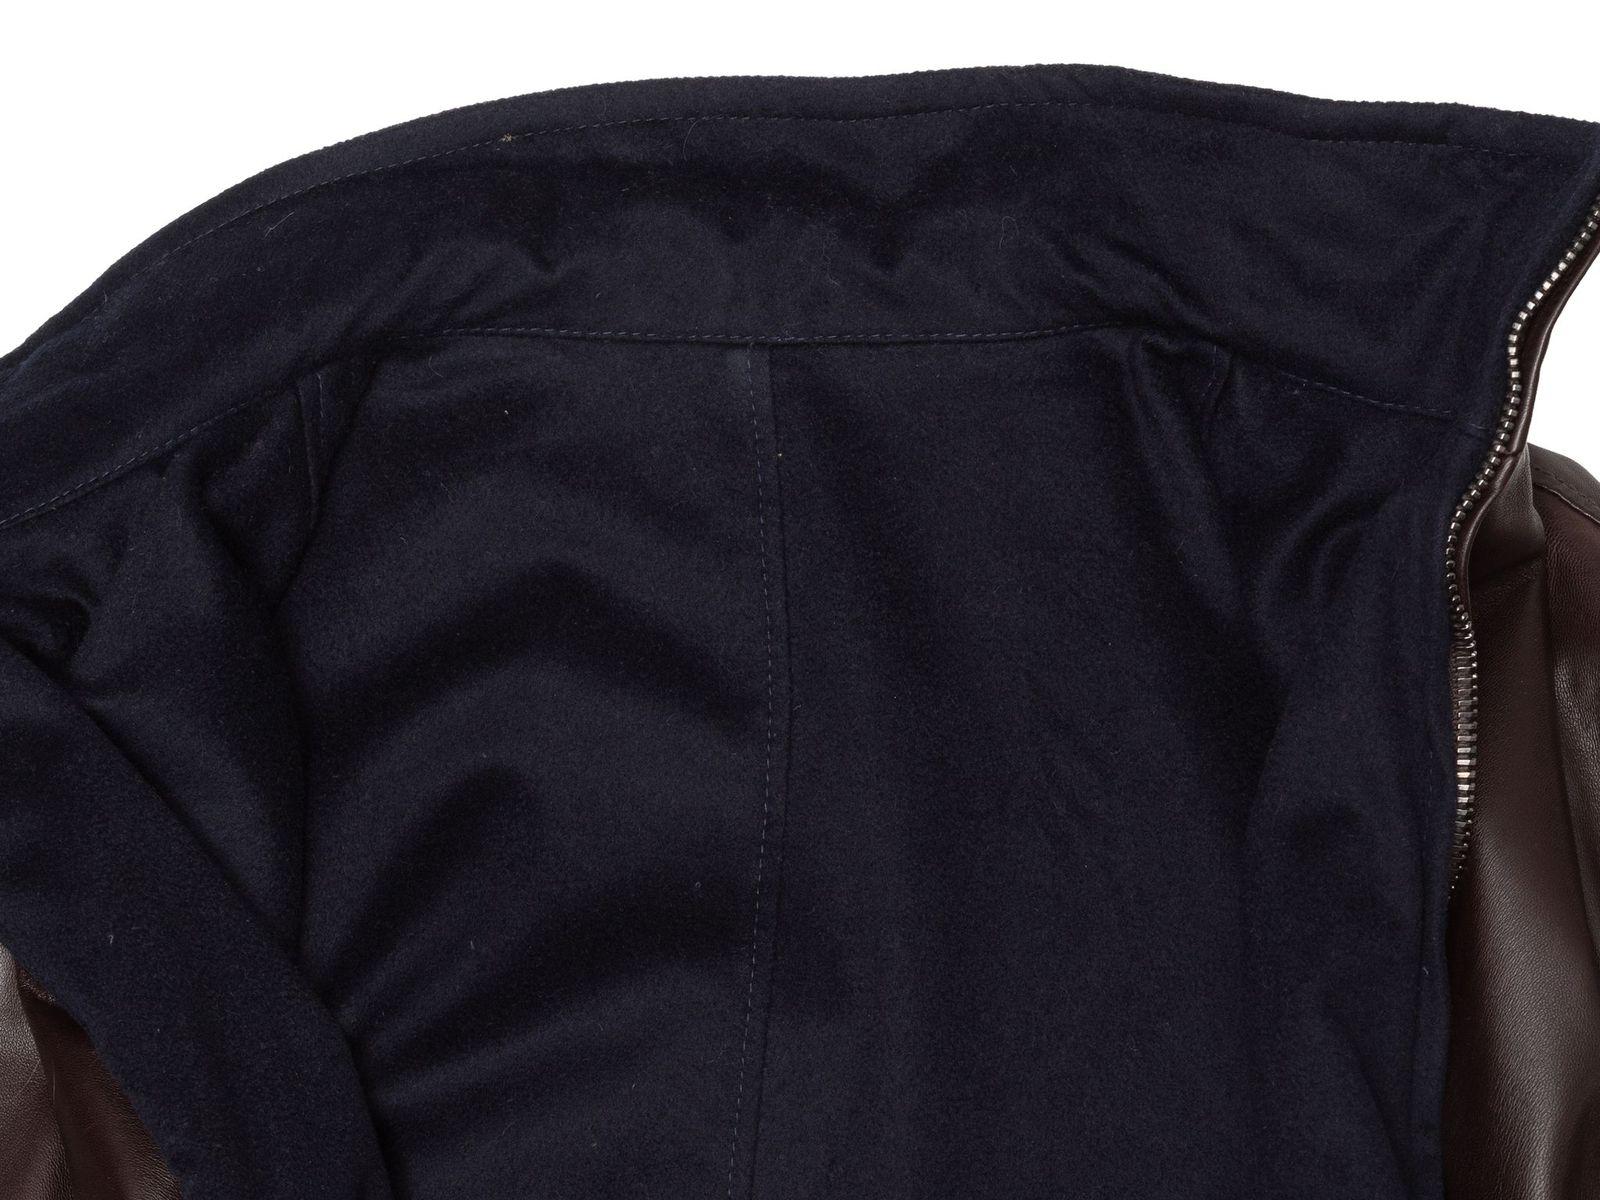 Product Details: Brown leather and navy wool reversible jacket by Barney's New York. Stand collar. Dual hip pockets. Zip closure at center front. 40